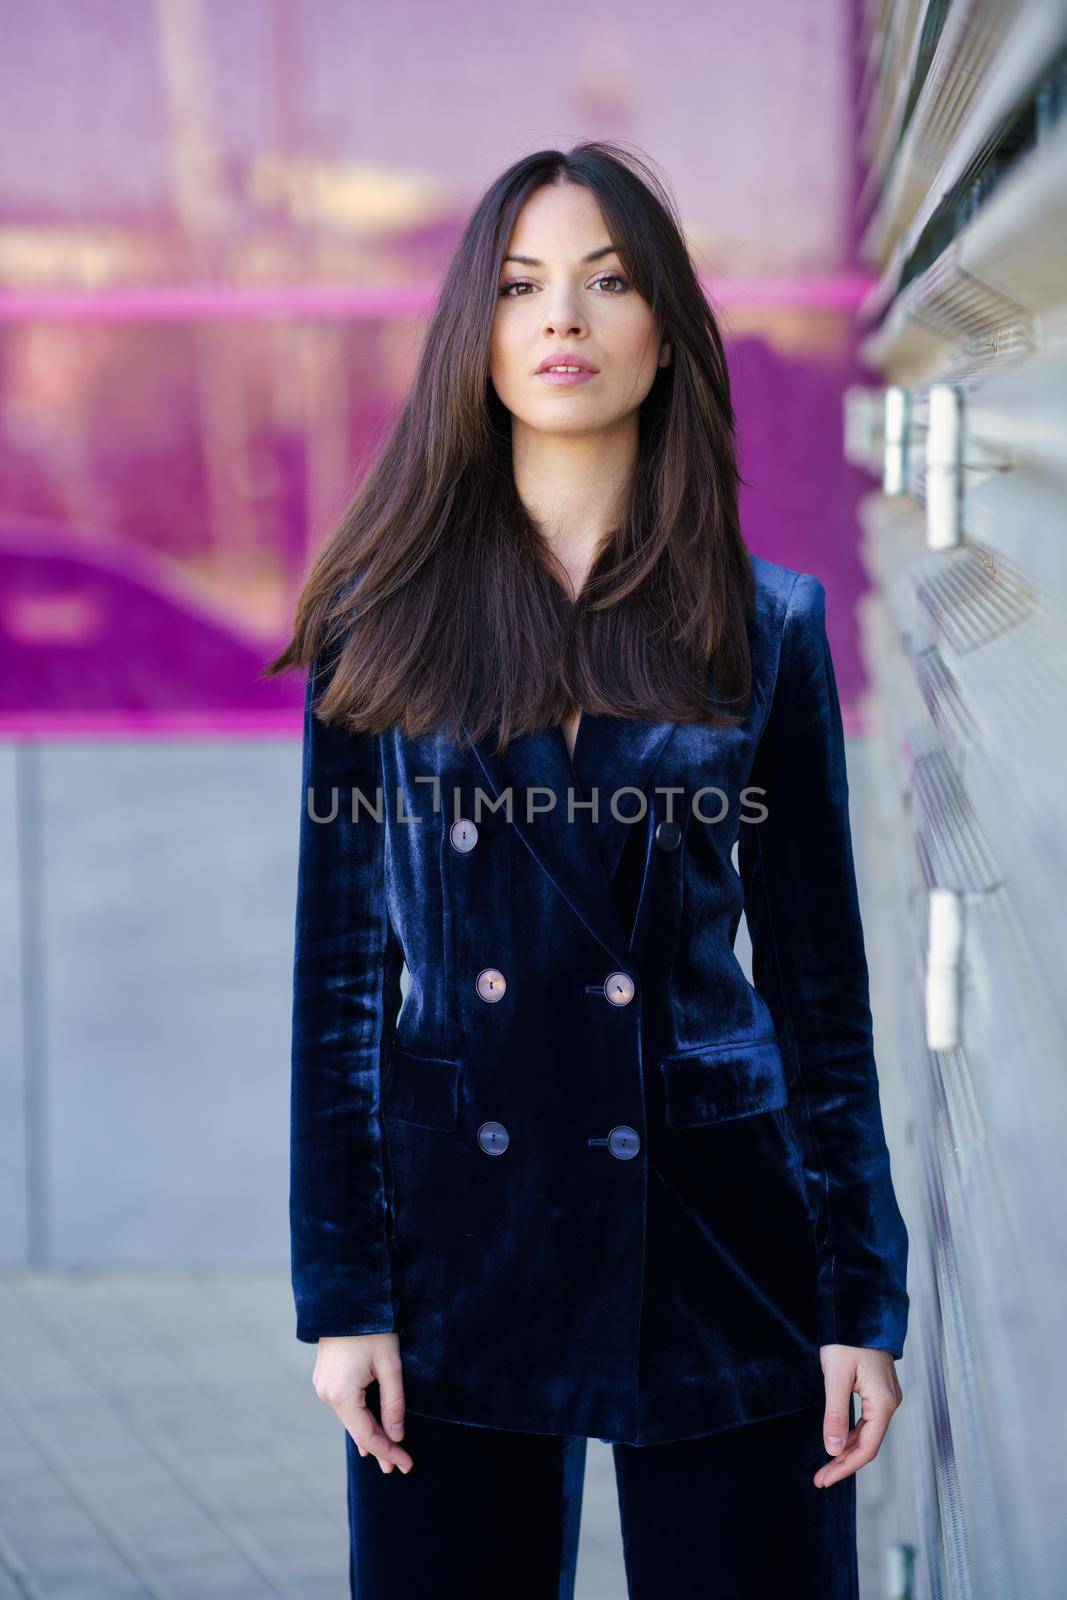 Woman wearing blue suit posing near a modern building. Lifestyle concept.